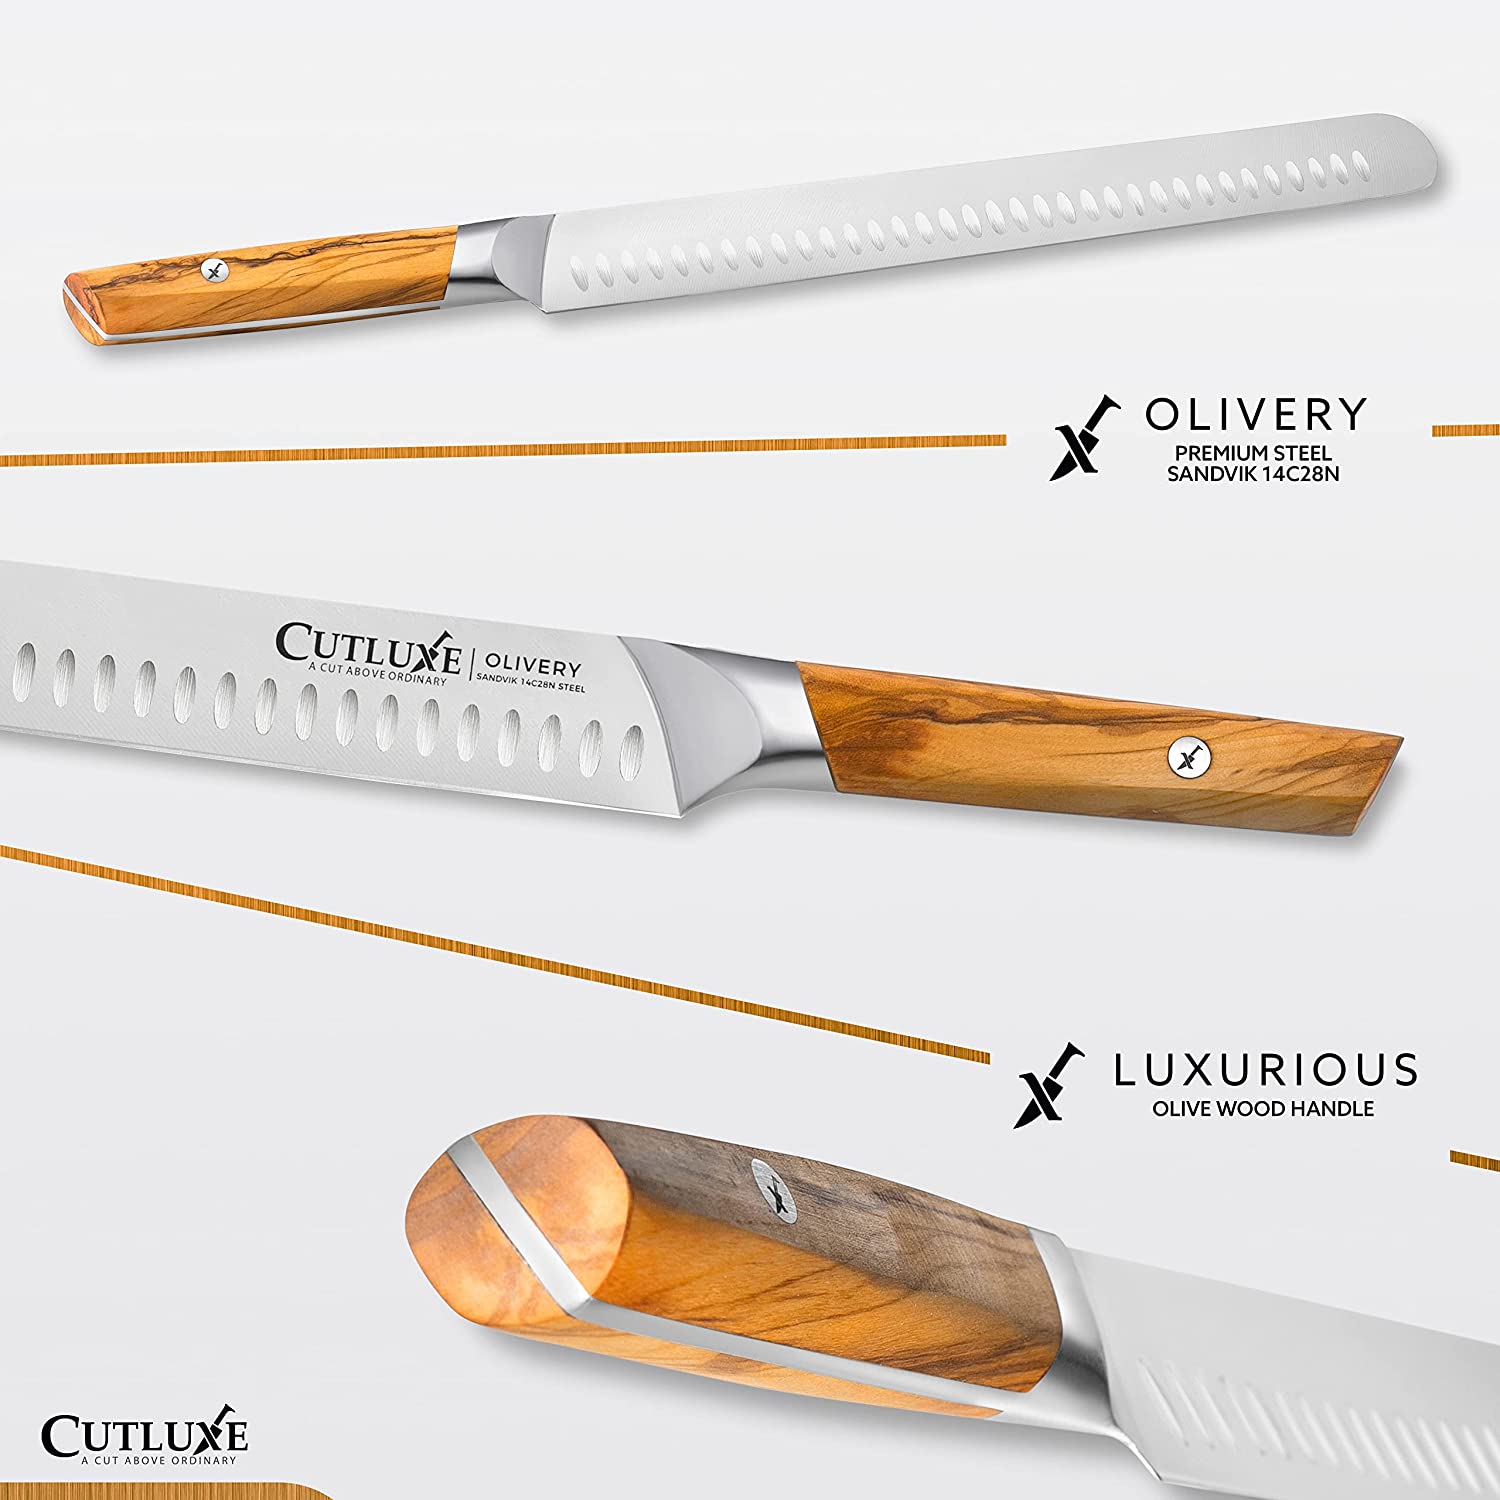 Cutluxe Slicing Carving Knife Review